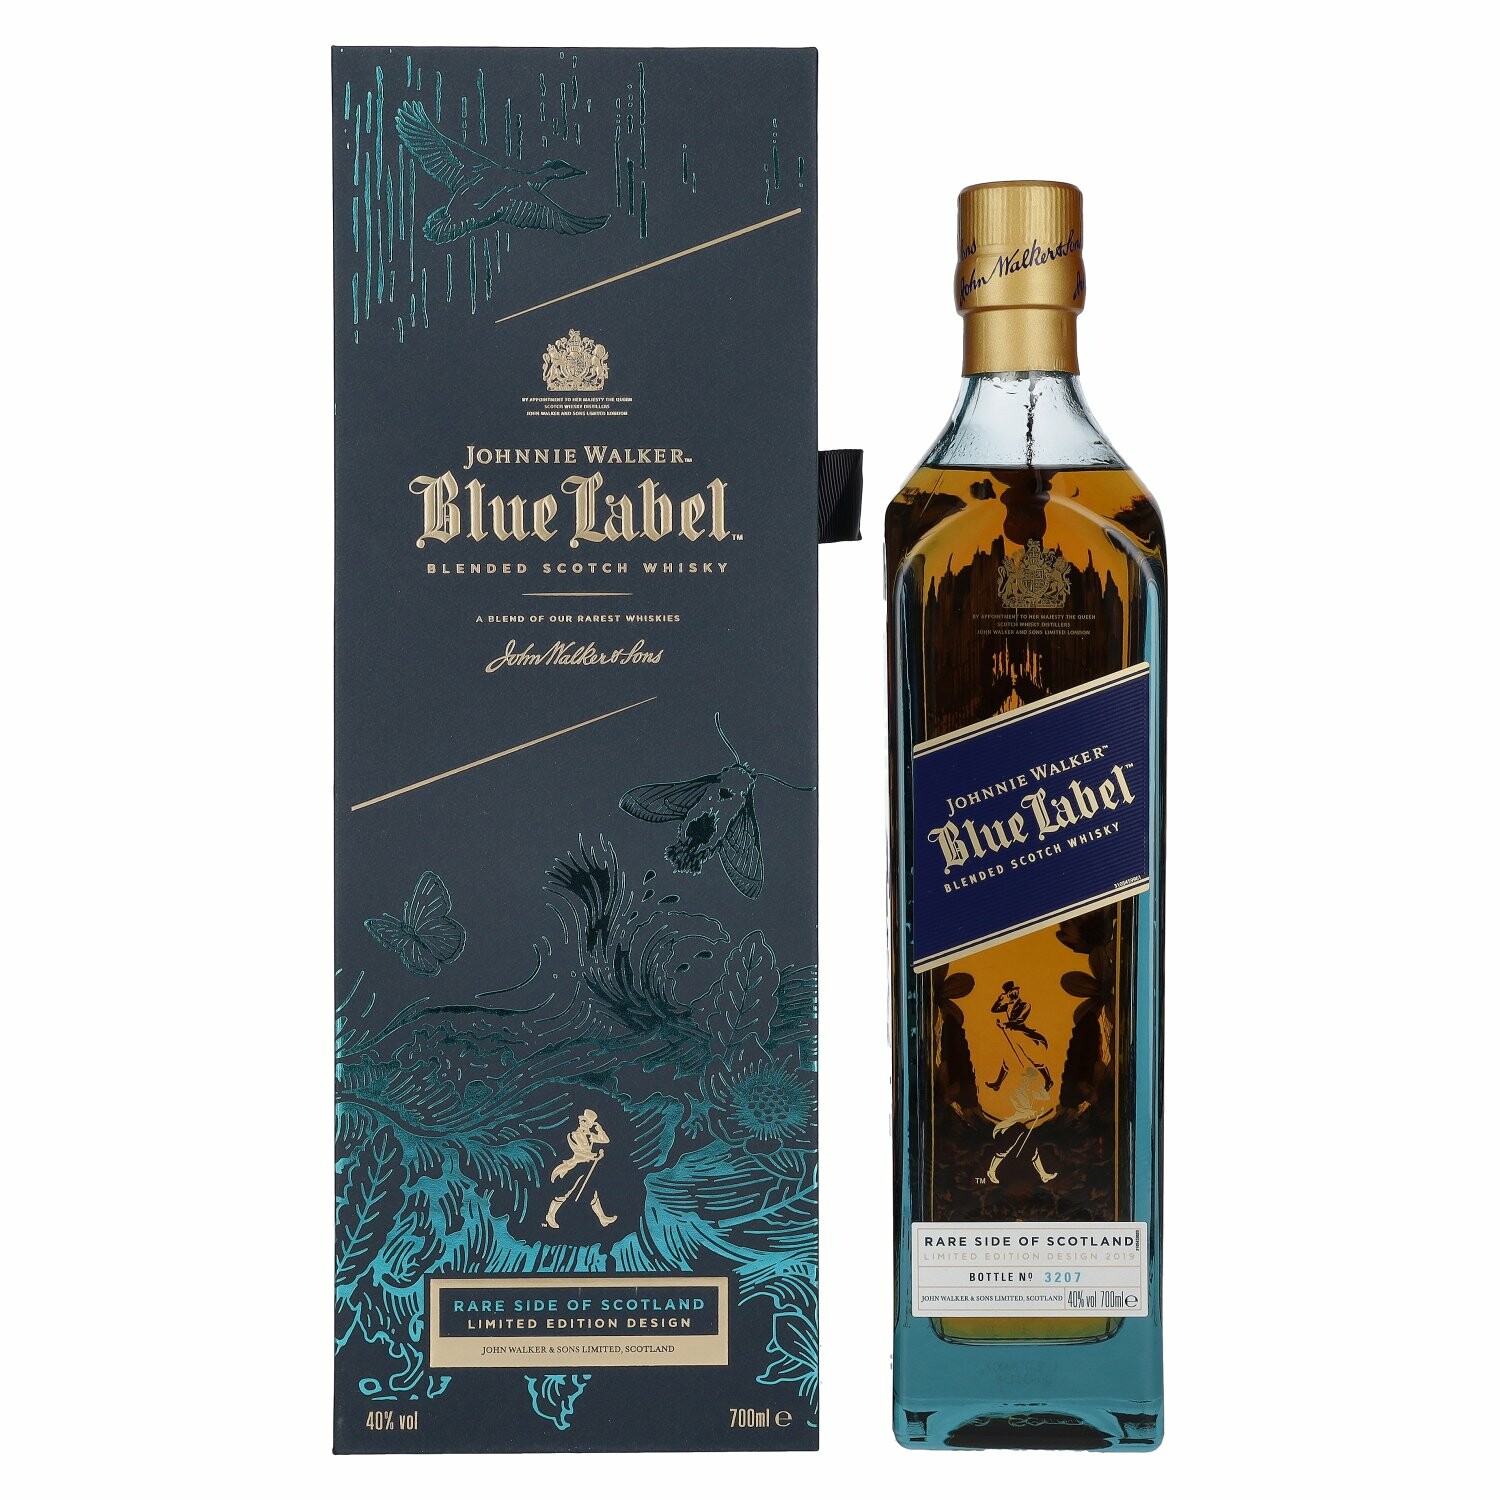 Johnnie Walker Blue Label Rare Side of Scotland Limited Edition 40% Vol. 0,7l in Giftbox